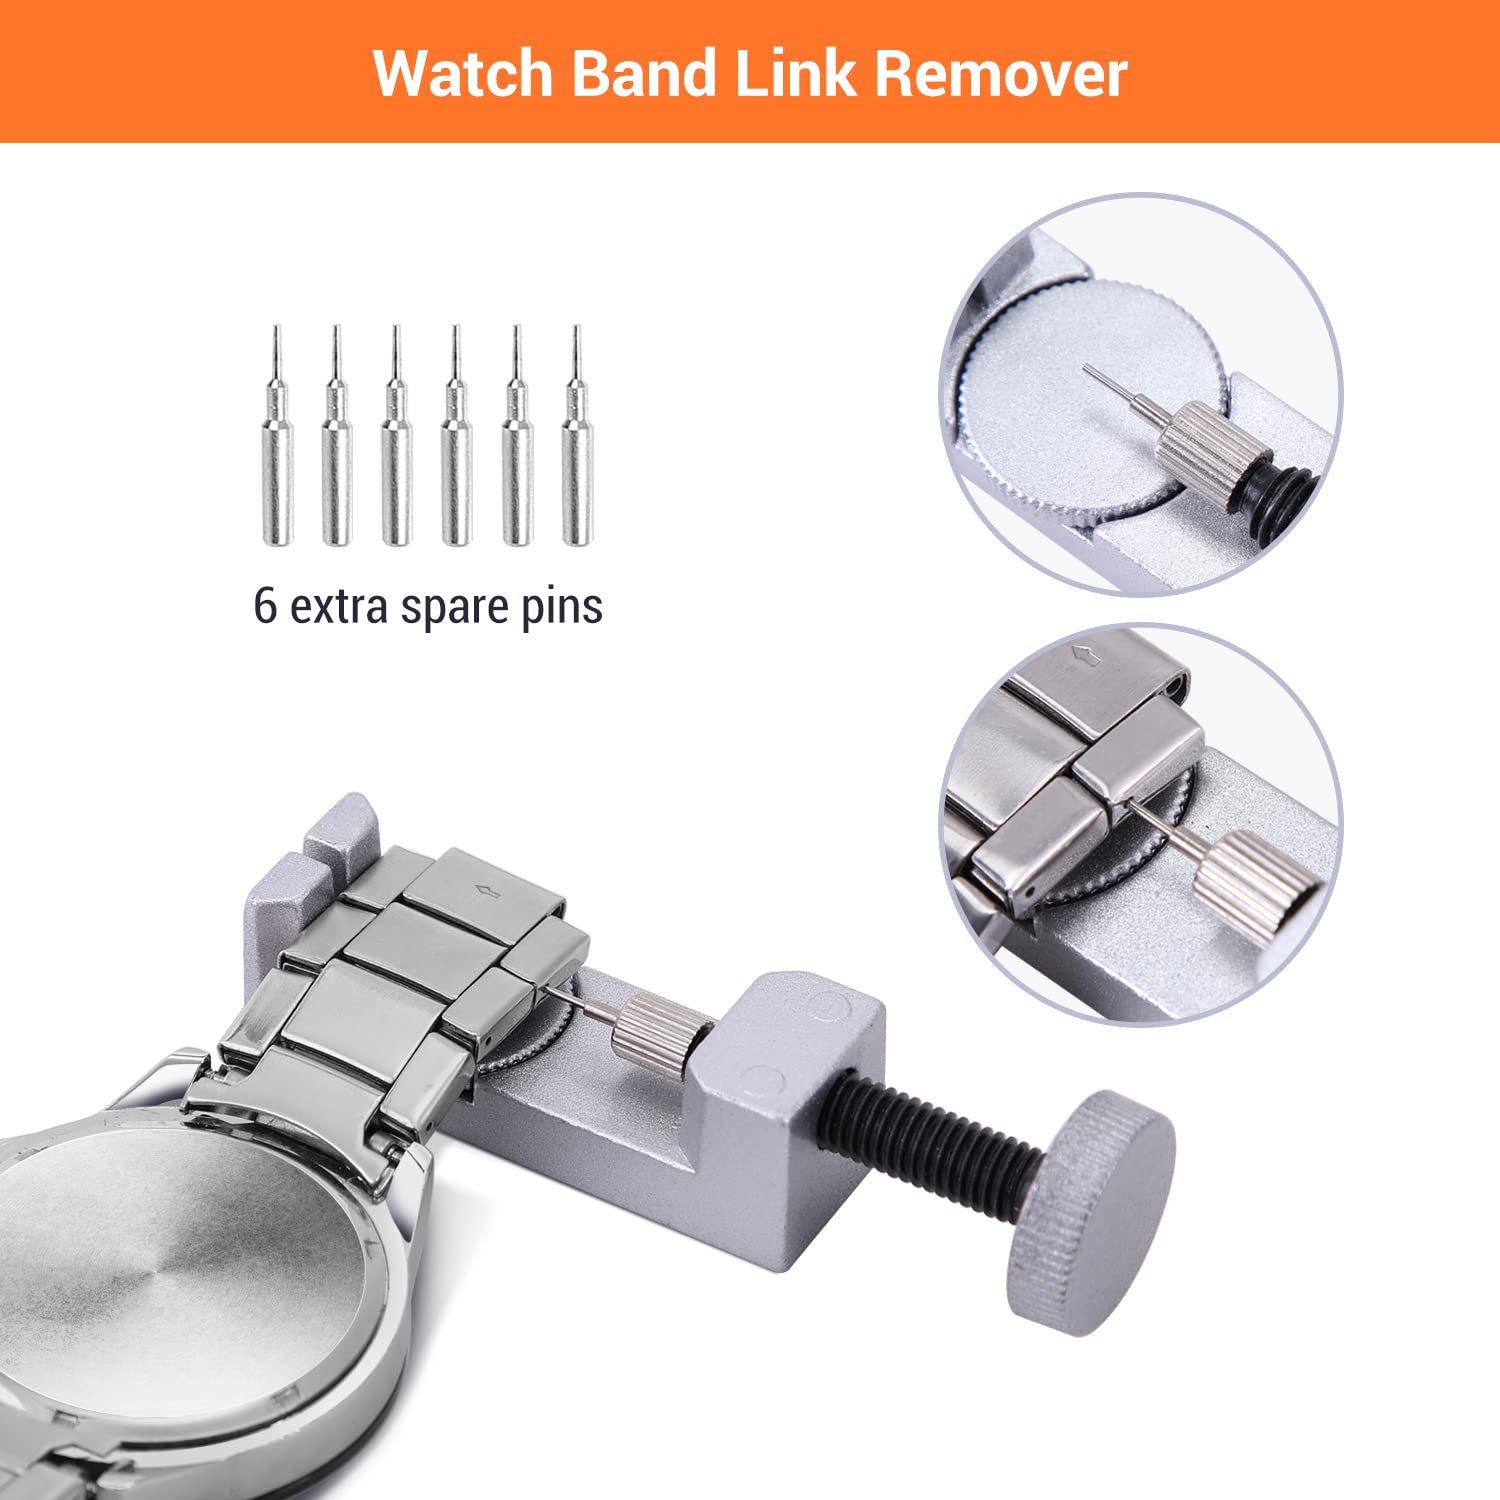 Watch Link Removal Tool Kit, Ohuhu Upgraded 166PCS in 1 Watch Repair Kit Watch Band Tool kit Watch Pin Removal Tool Spring Bar Tool Watch Link Remover Strap Tool with 126PCS Link Pins Perfect Gifts